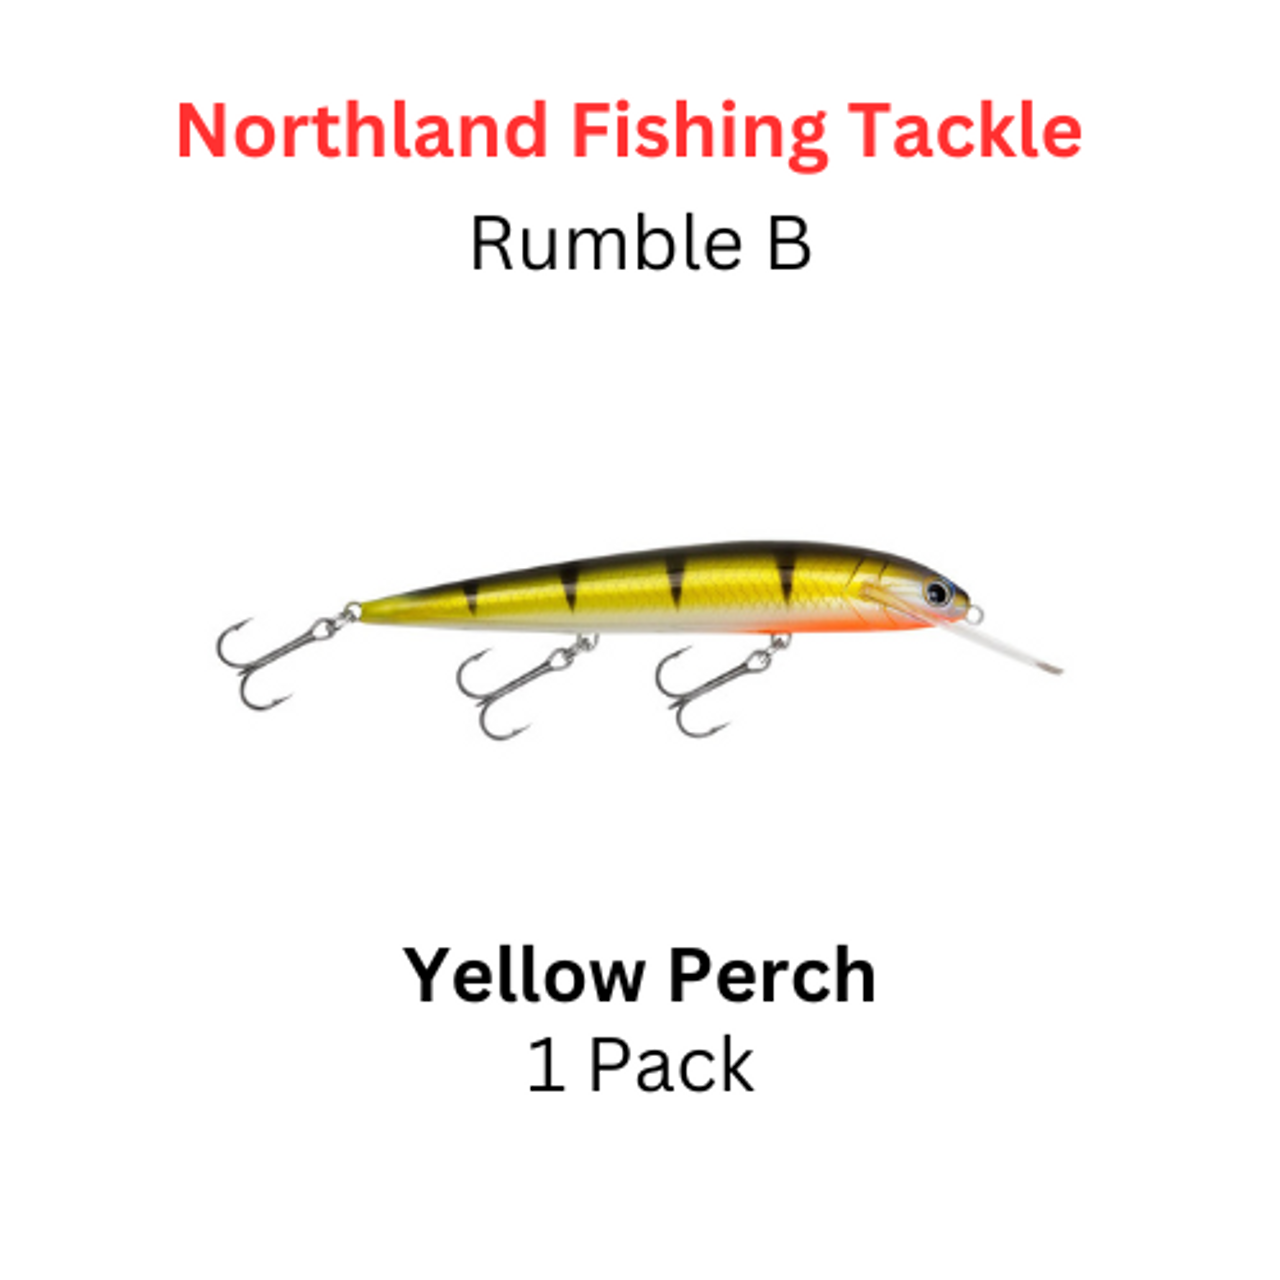 Northland Fishing tackle: Rumble B size 09 yellow perch